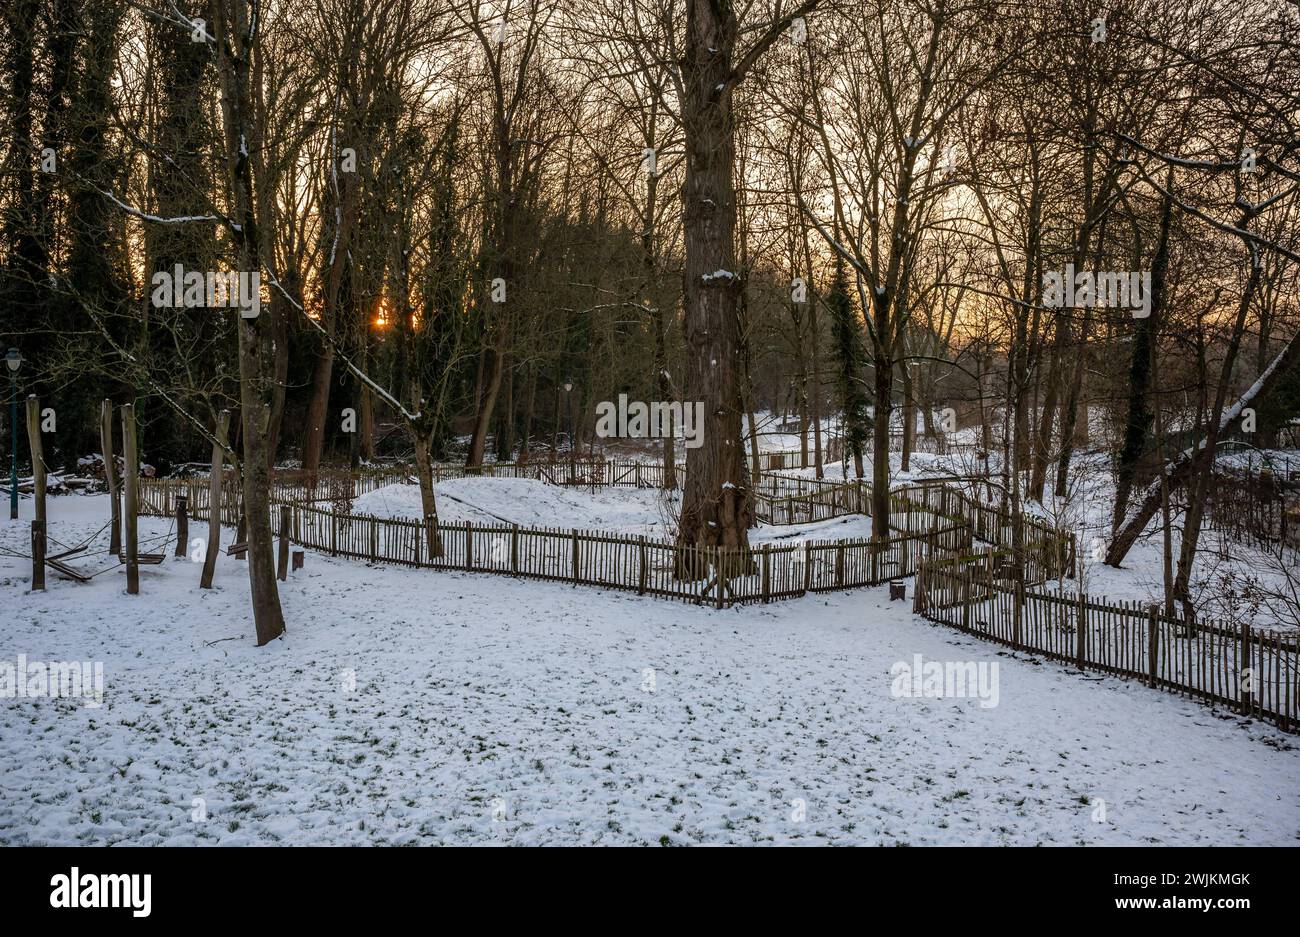 Landscape view over a park with wooden hedges, covered with snow, Jette, Brussels, Belgium Stock Photo